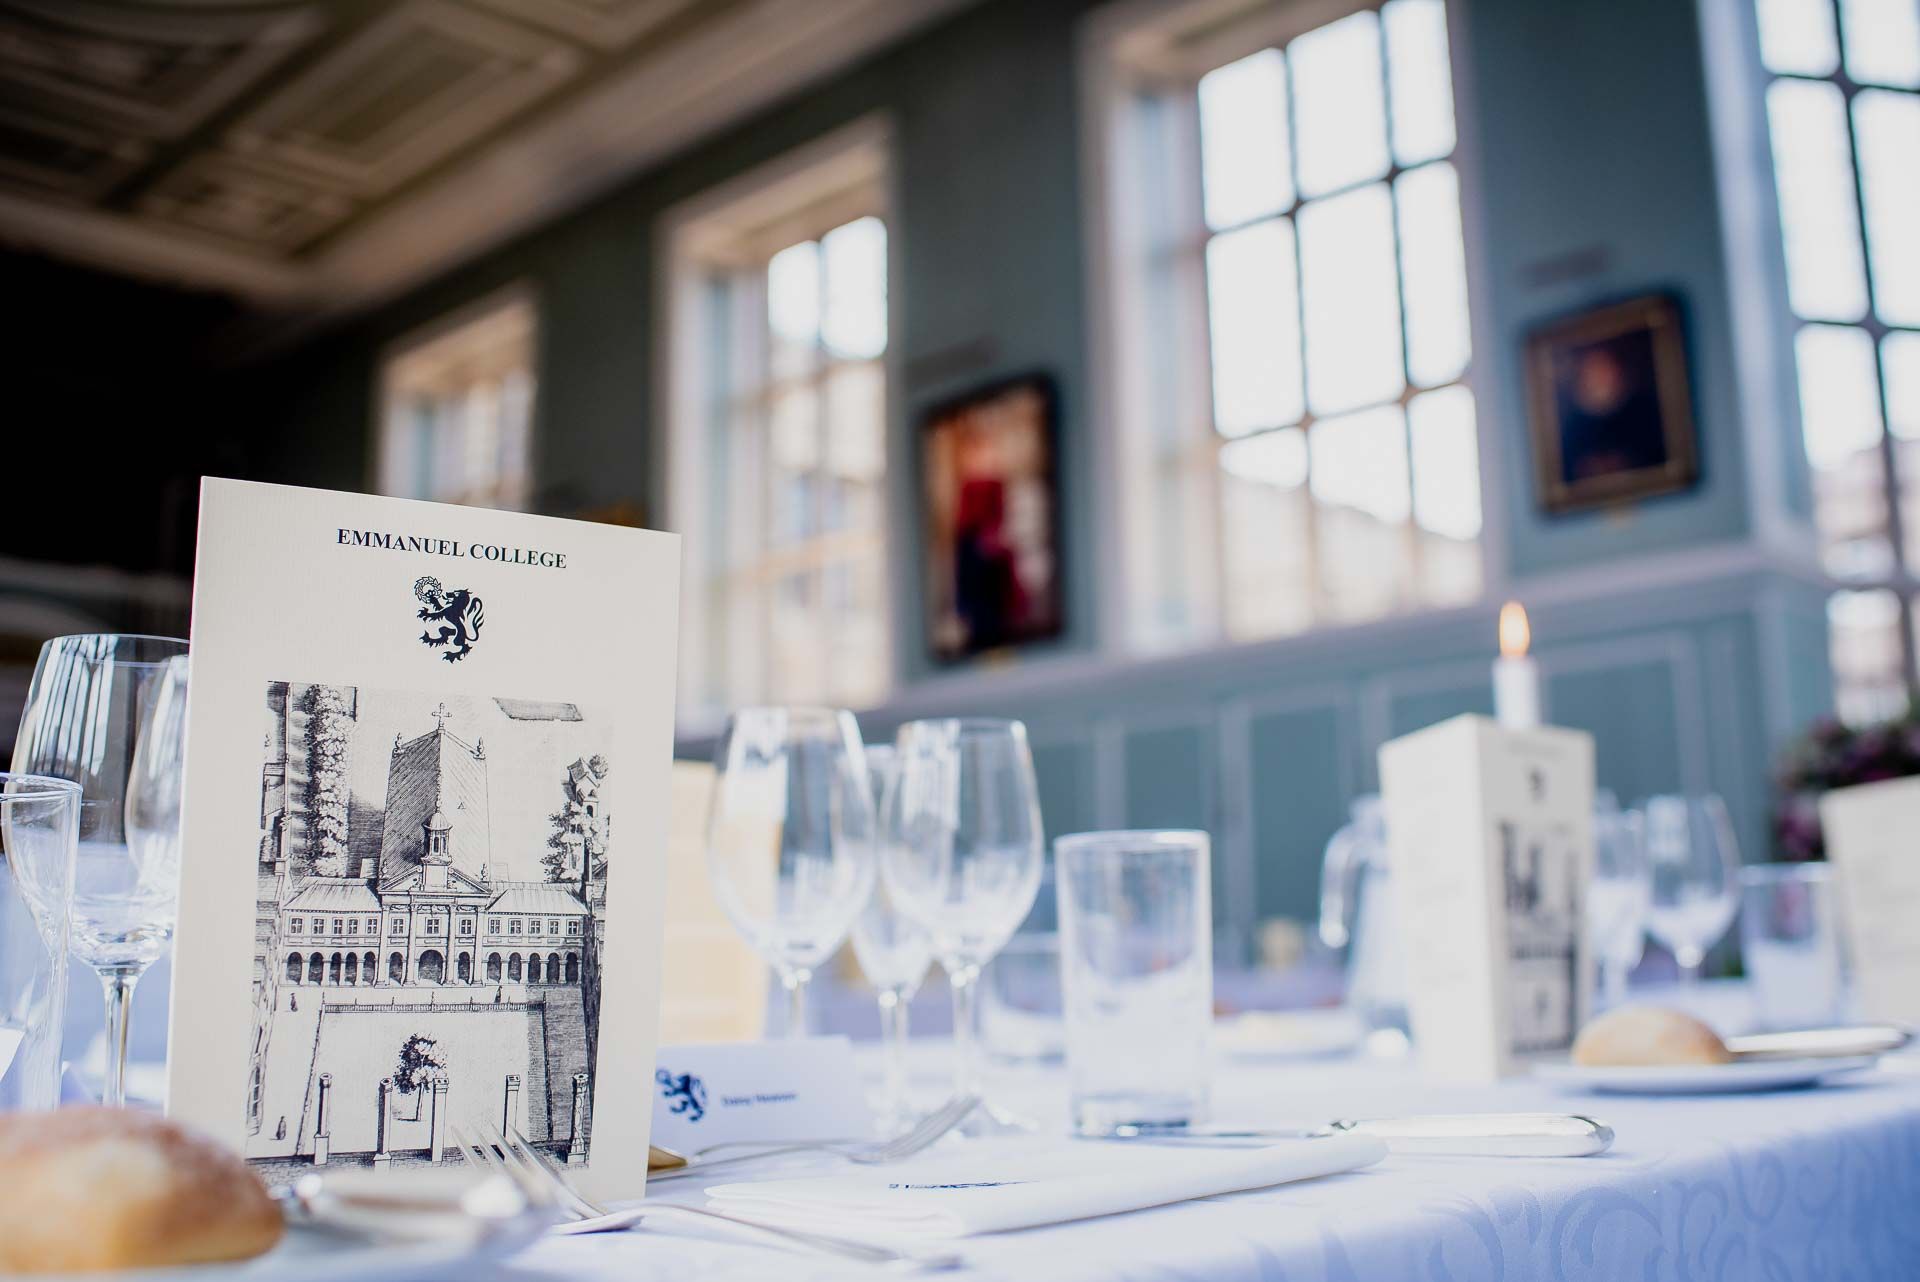 The table set for the wedding breakfast with the menu cover stood upright on the table displaying Emmanuel College image. A candle and glassware is blurred in the background against the big glass windows. Photo thanks to Damien Vickers Photography.